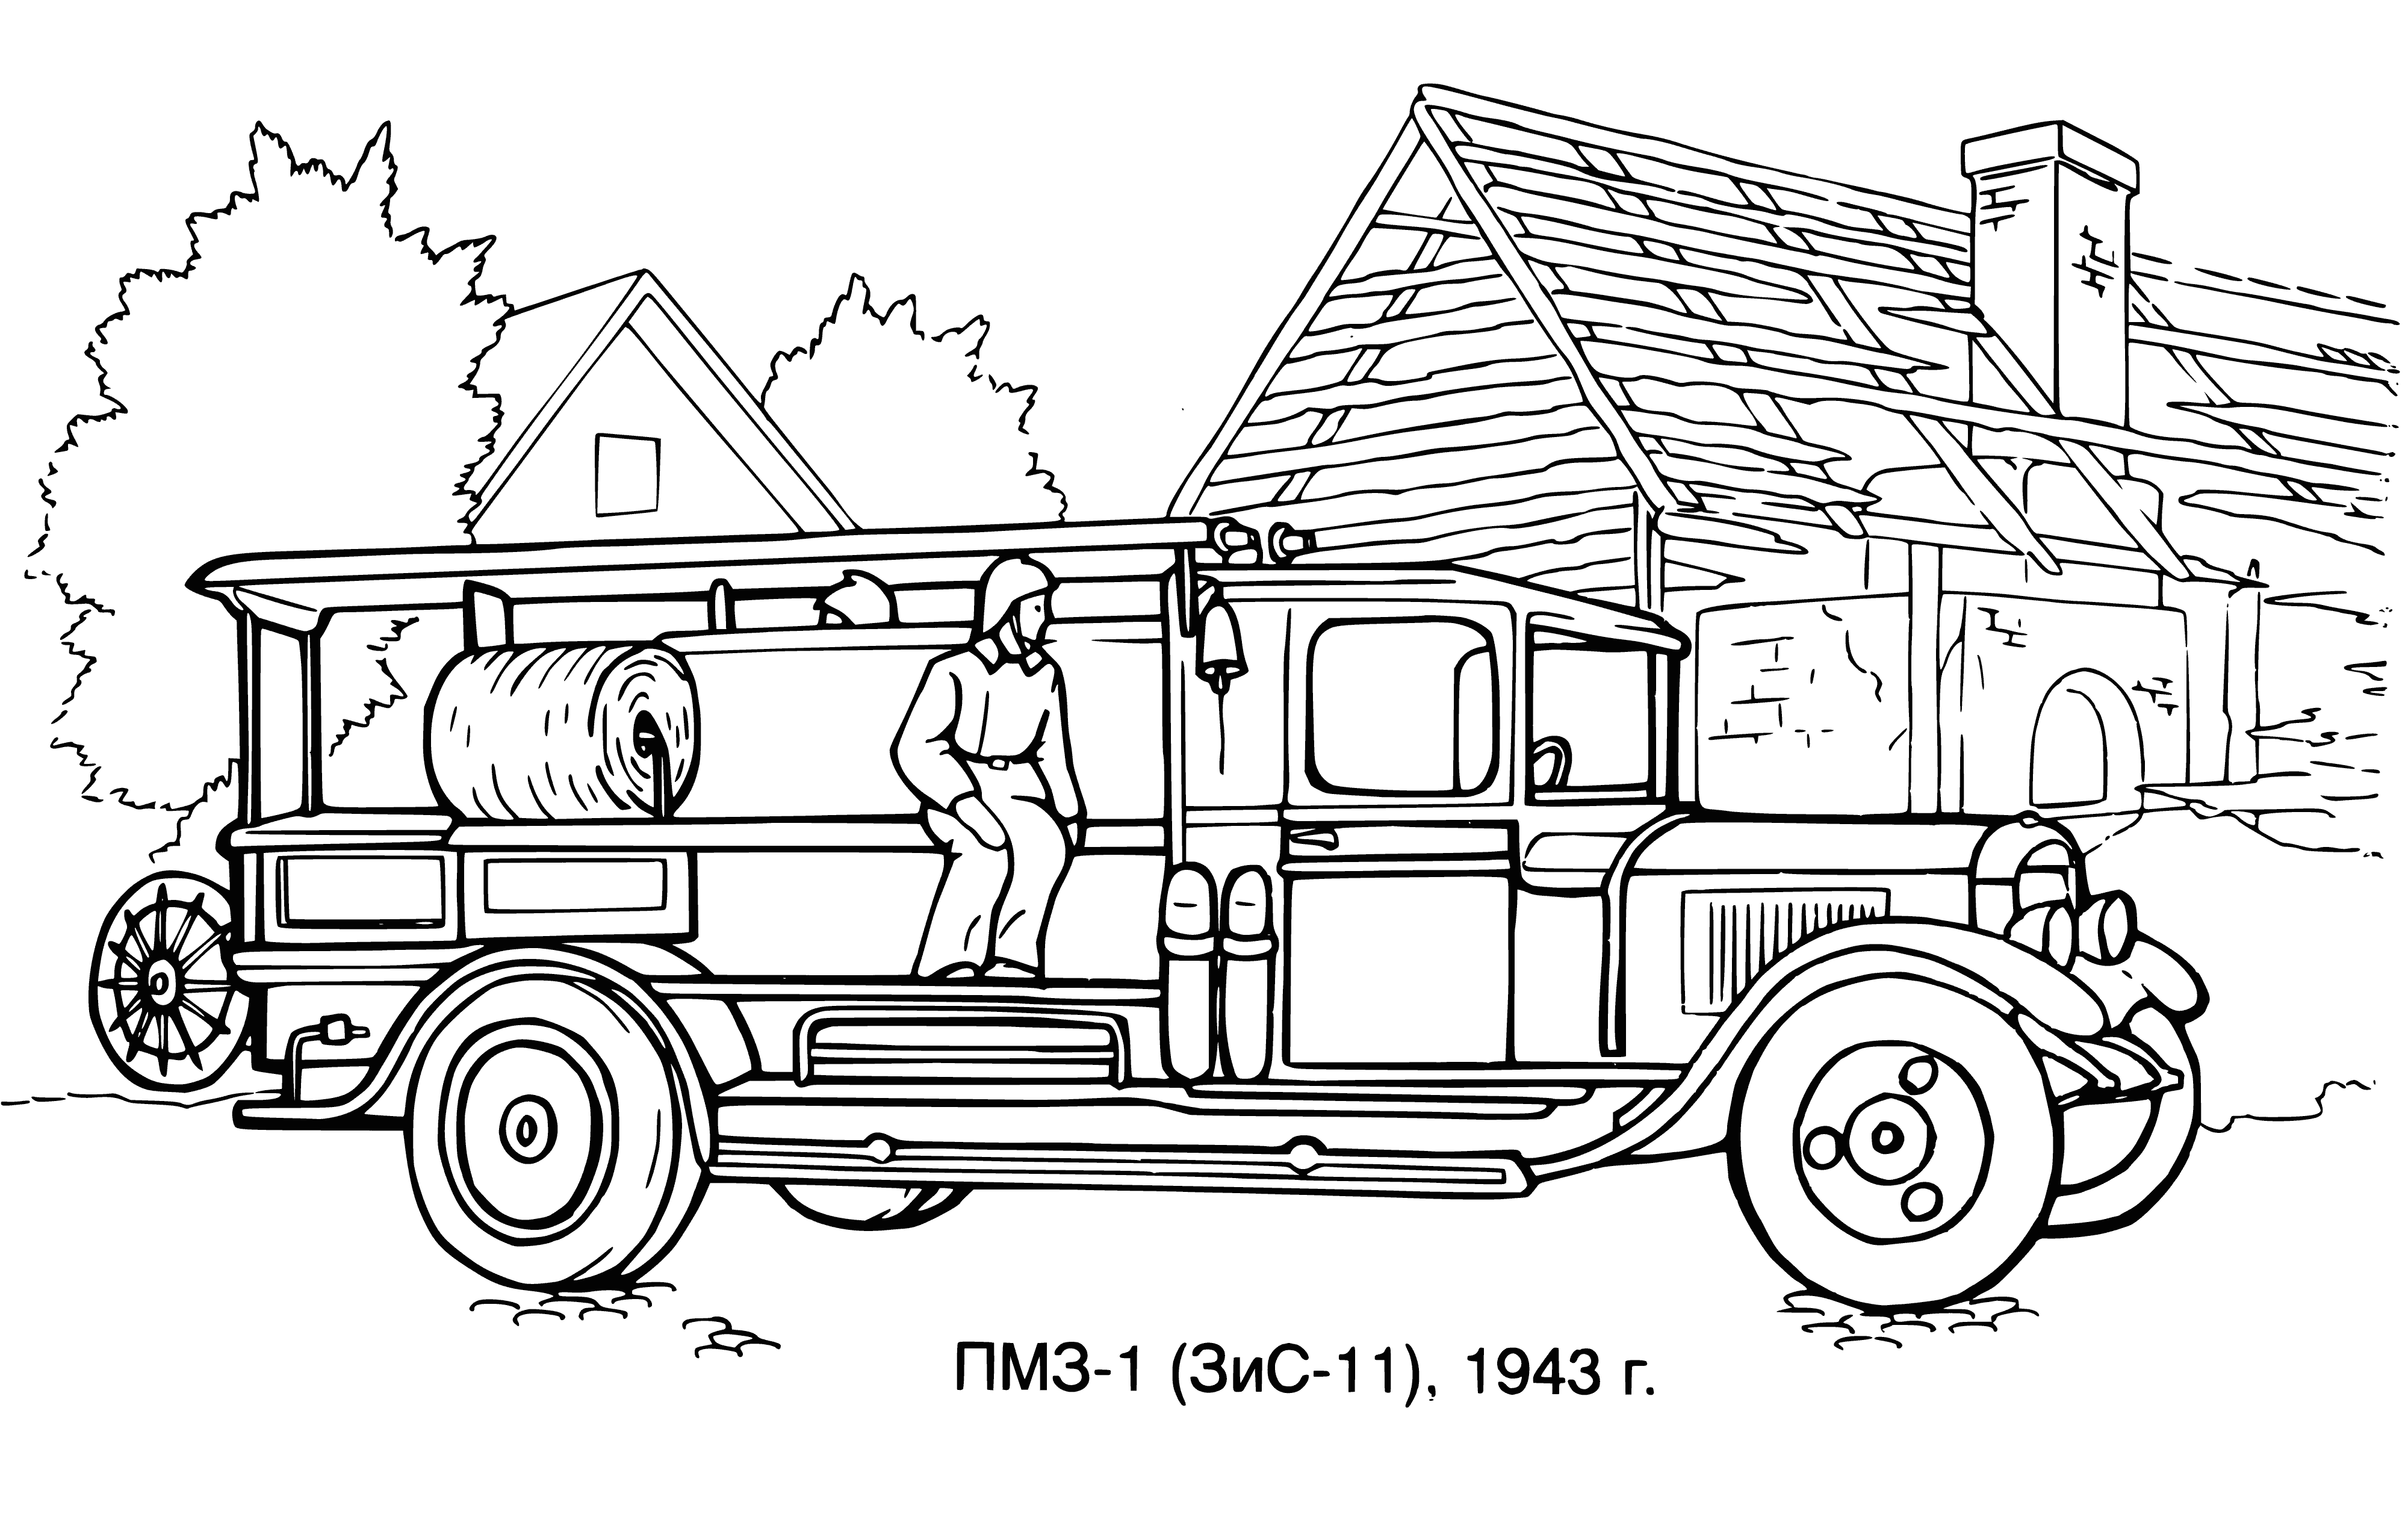 coloring page: Firefighters & police stand in front of big red fire engine with ladder. Firefighters wear red, police in blue uniforms. #Firefighters #Police